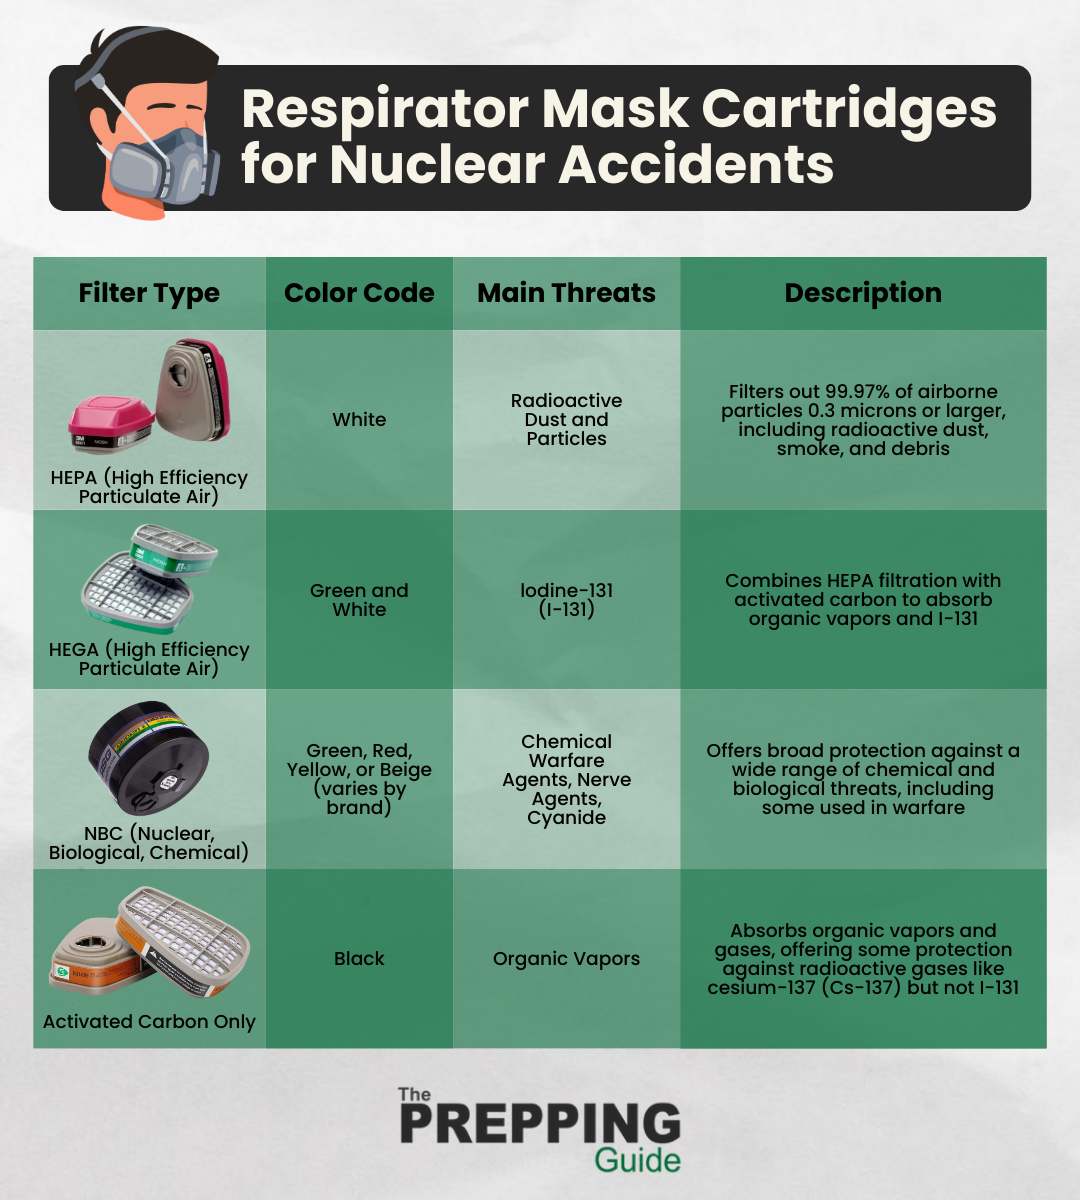 A table of the different respirator mask cartridges for nuclear accidents.